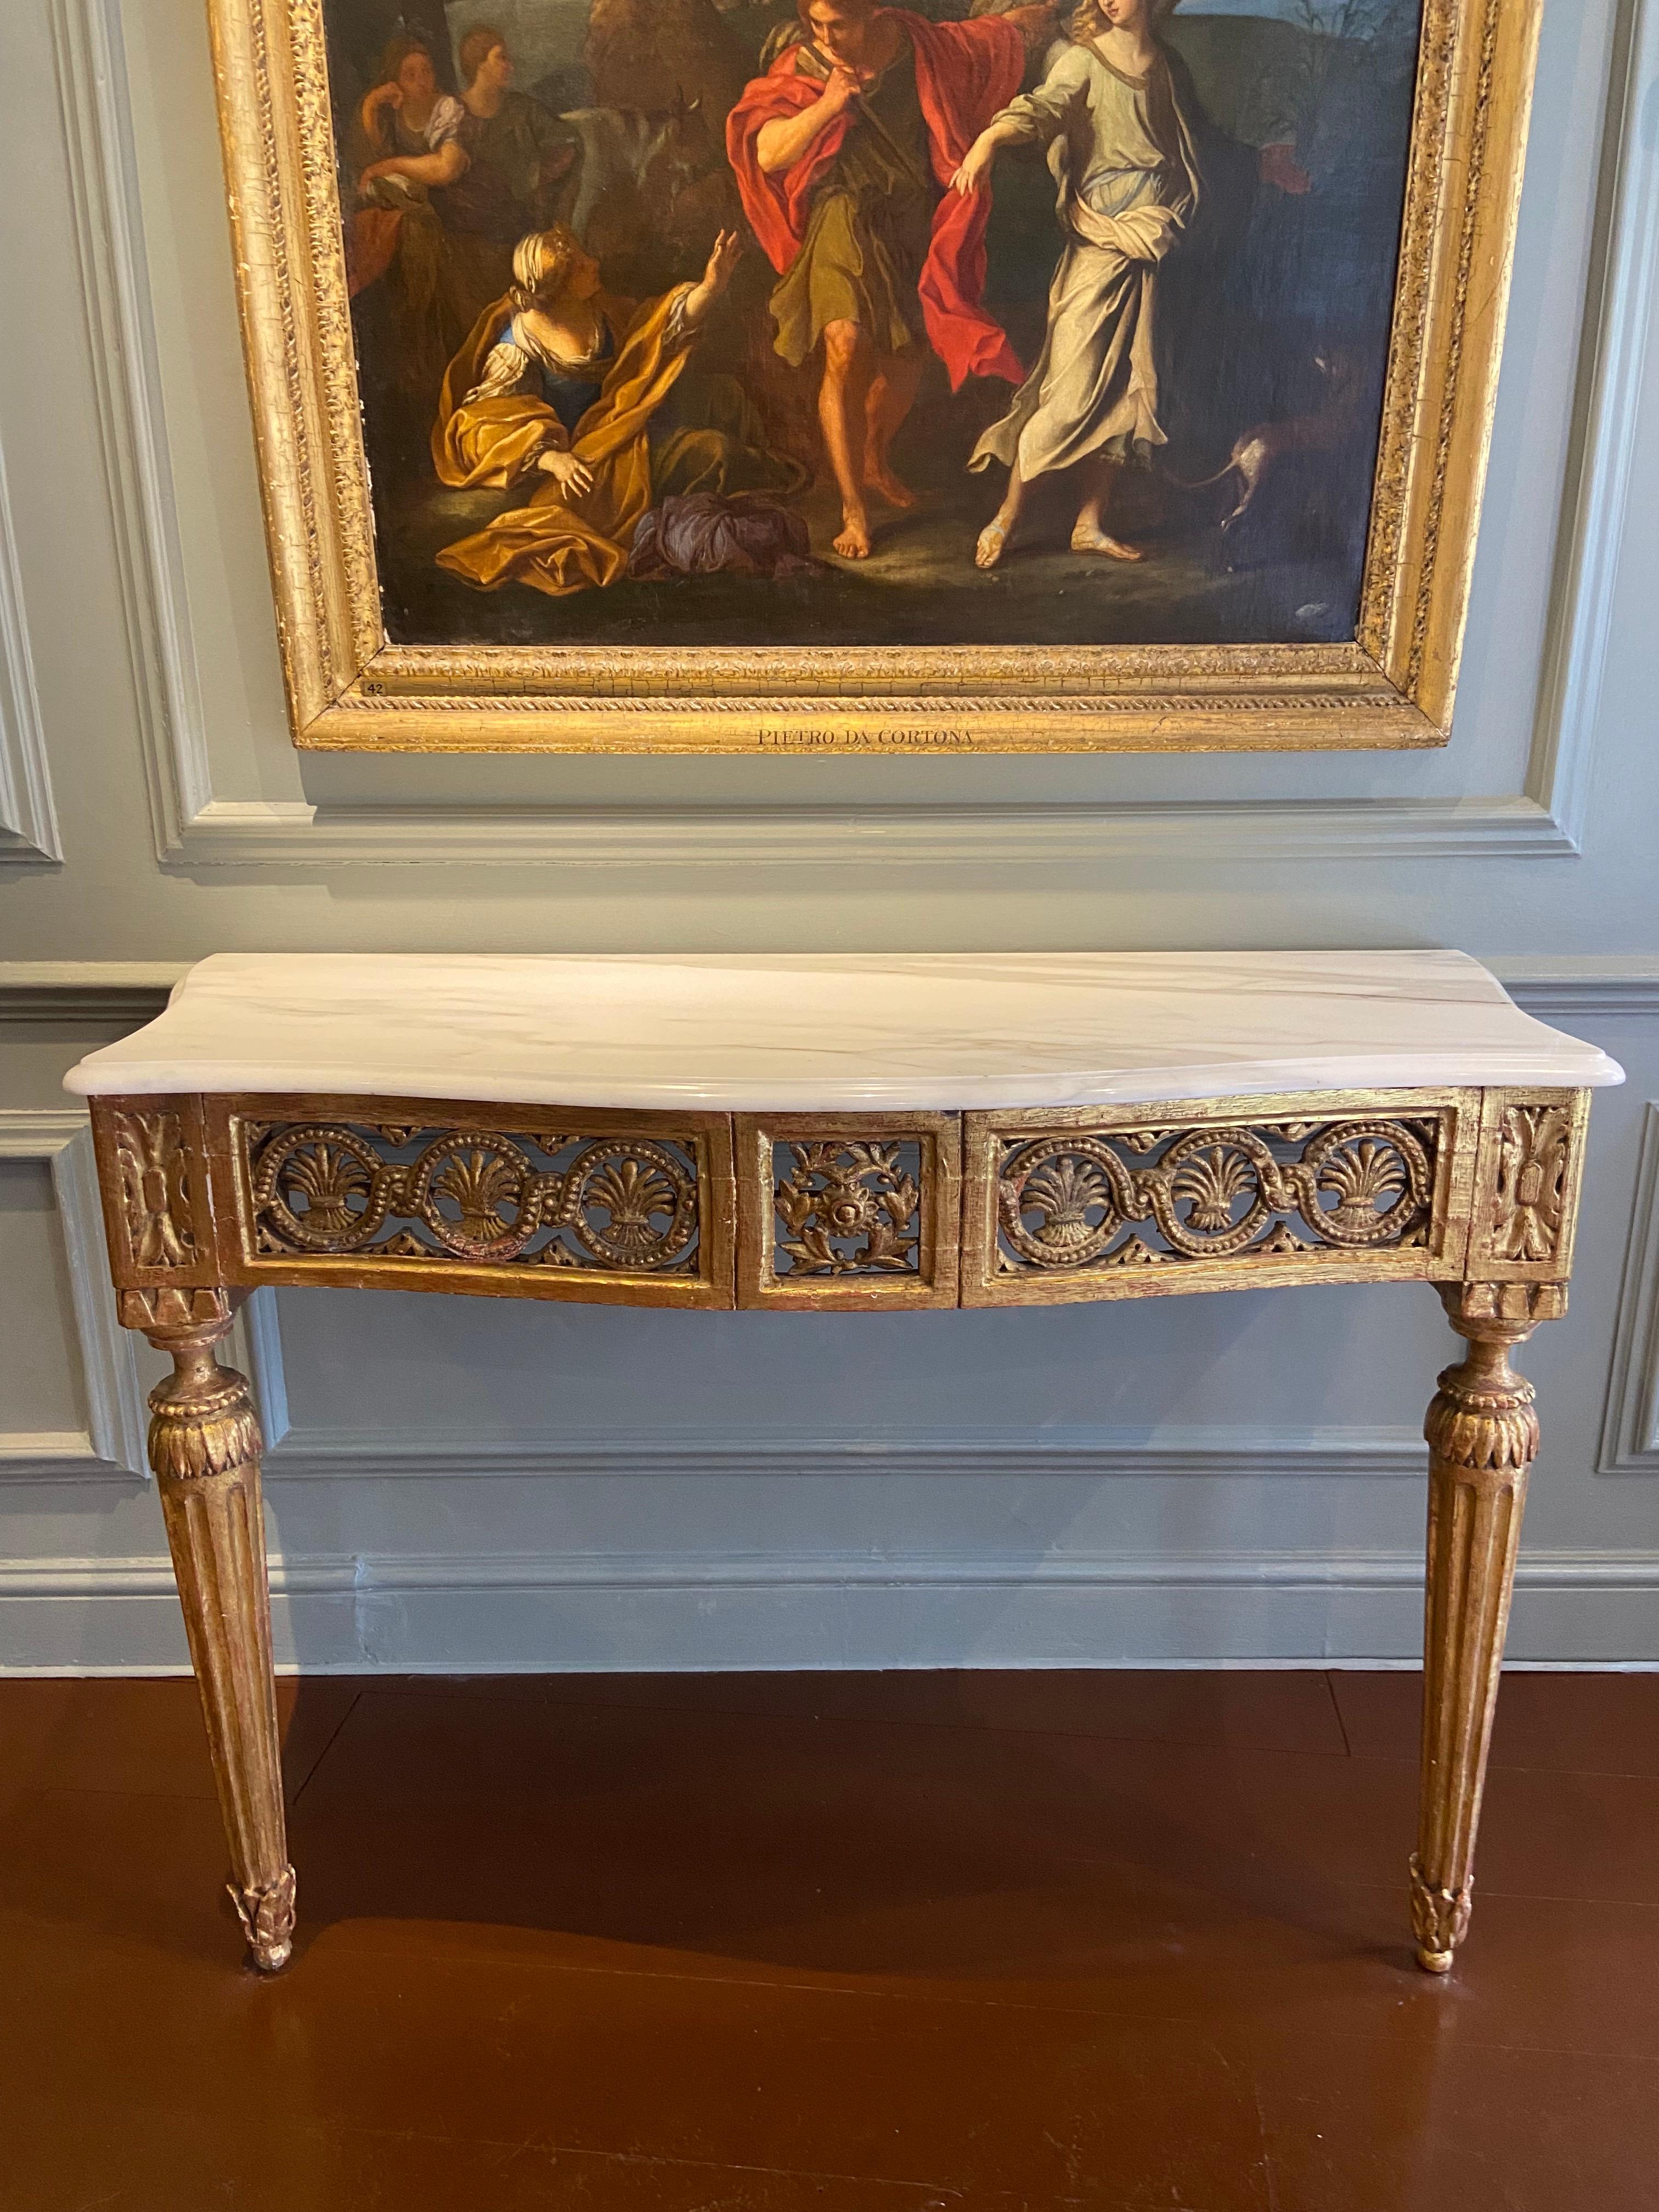 Northern Italian serpentine carved Gilt-Wood console table (Late 18th Century). Pierced wheat sheaf frieze with later white marble top.